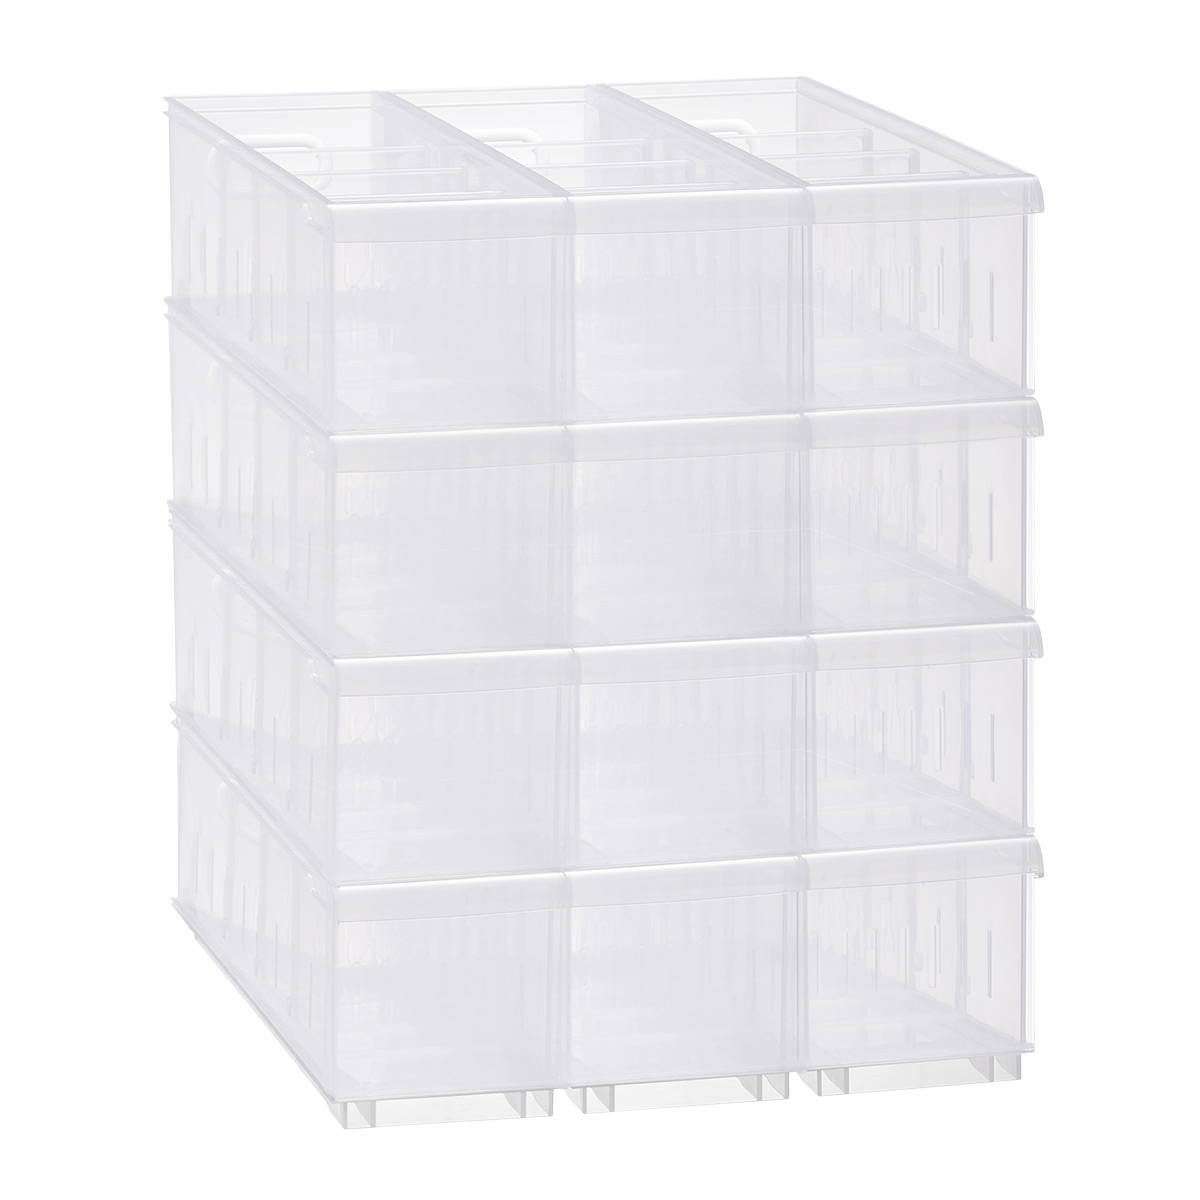 https://images.containerstore.com/catalogimages/489979/10090392-long-narrow-stak-bin-clear-.jpg